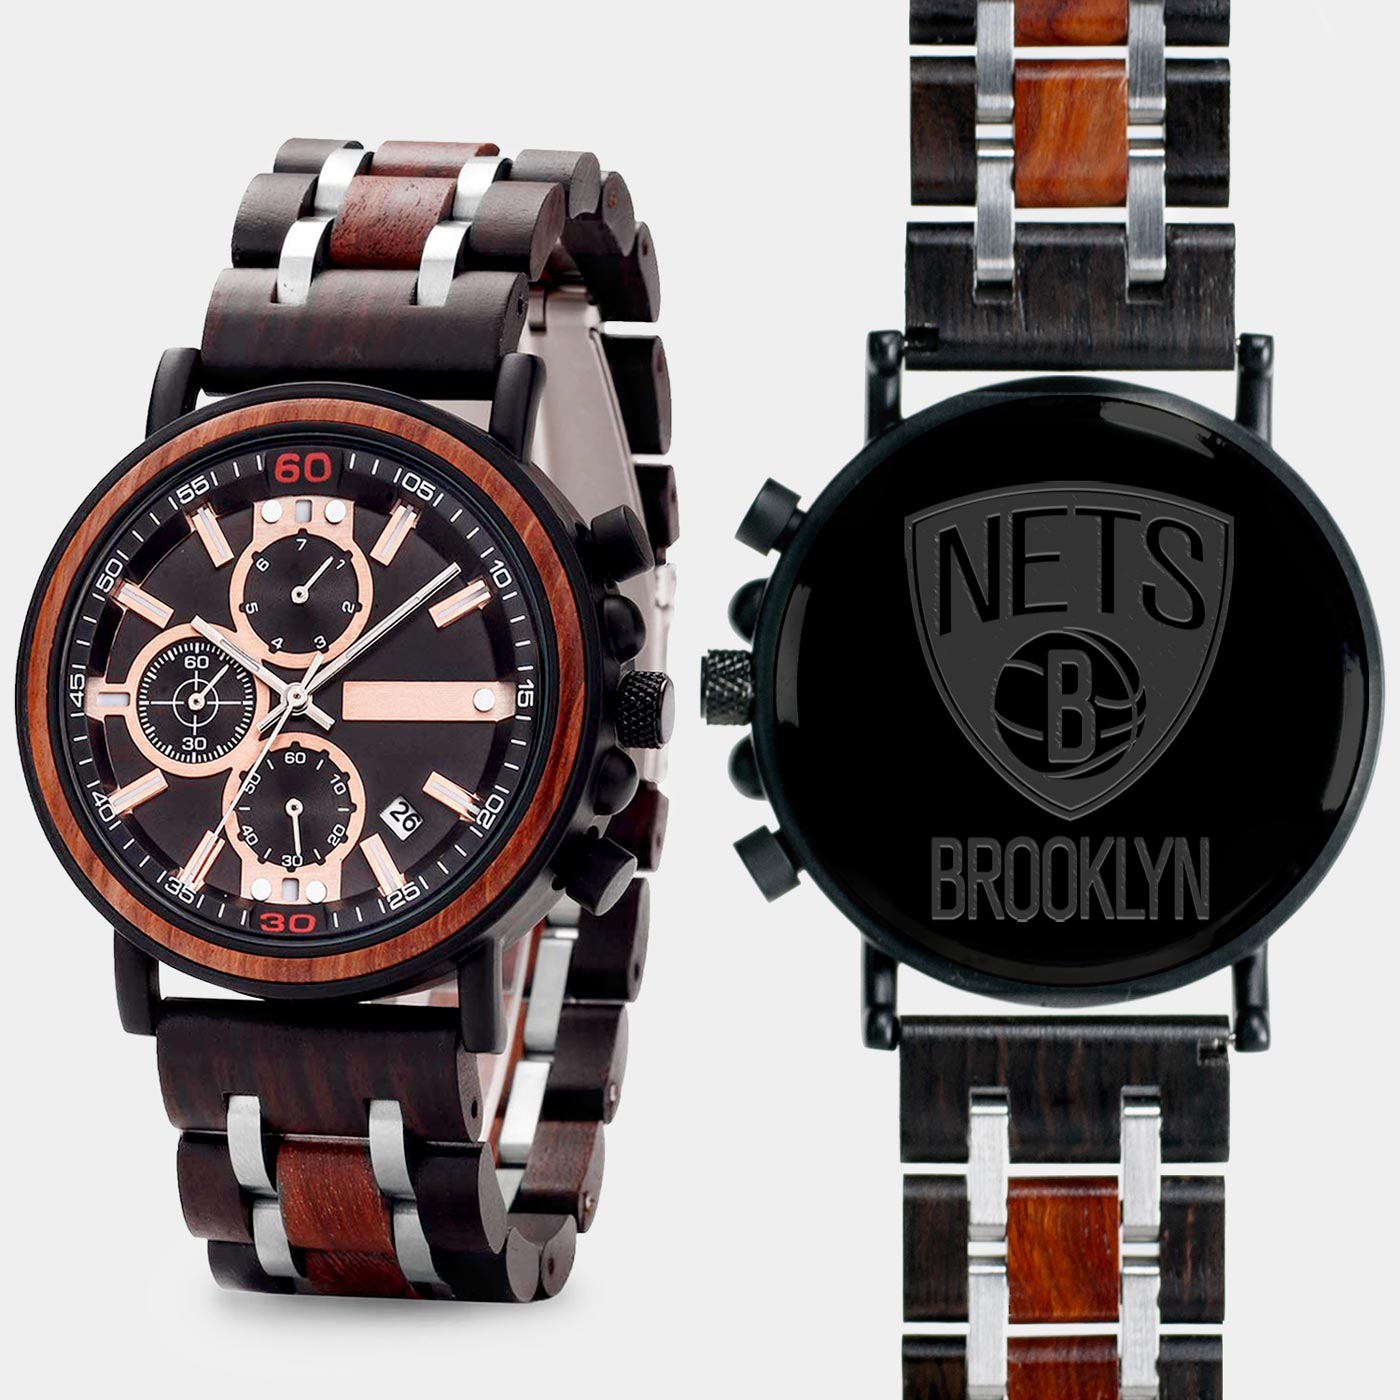 Brooklyn Nets Mens Wrist Watch  - Personalized Brooklyn Nets Mens Watches - Custom Gifts For Him, Birthday Gifts, Gift For Dad - Best 2022 Brooklyn Nets Christmas Gifts - Black 45mm NBA Wood Watch - By Engraved In Nature